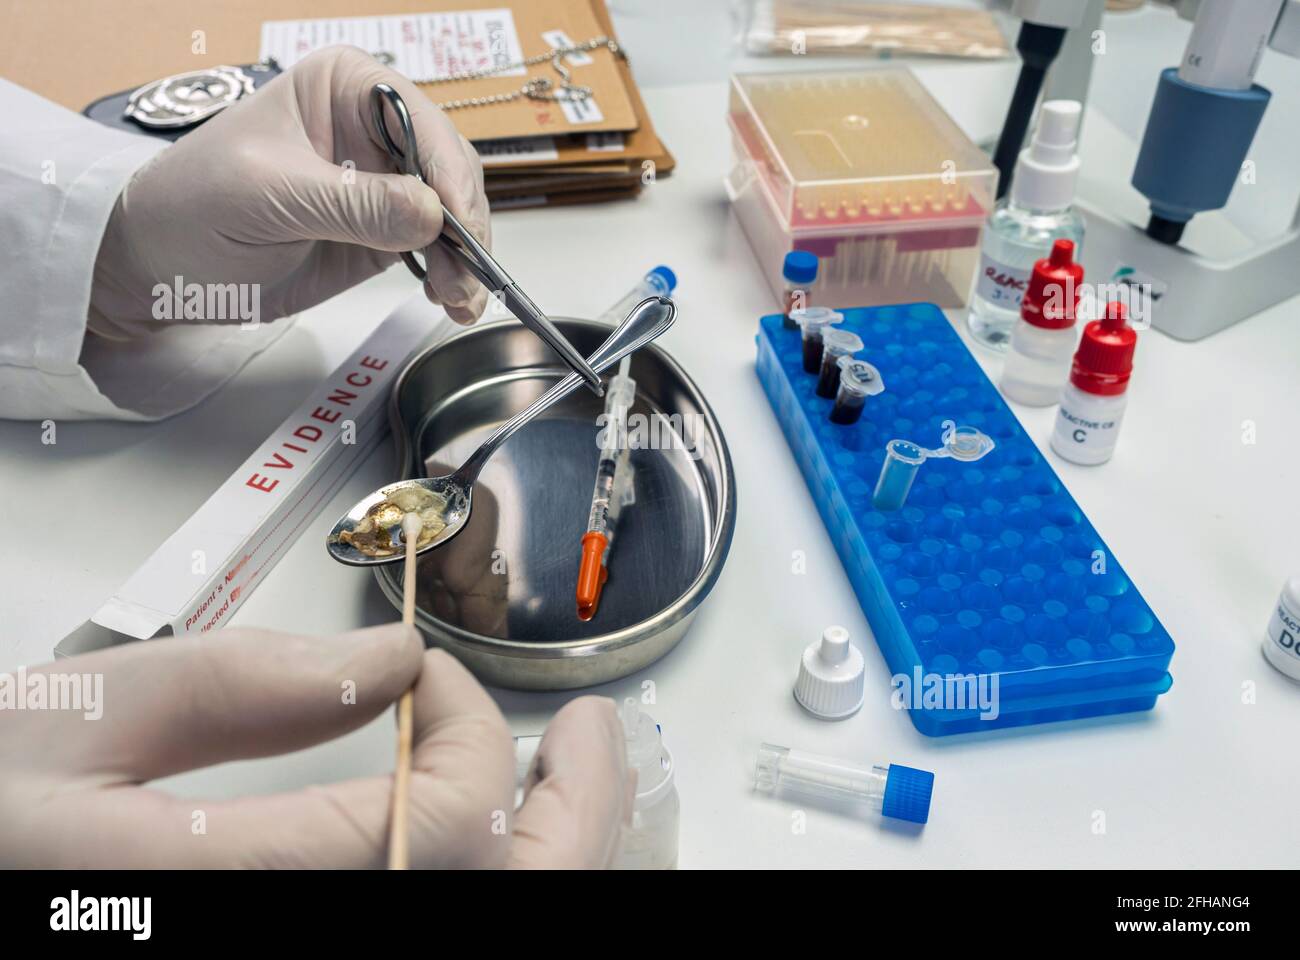 Police scientist holding spoon used in crime lab overdose case, conceptual image Stock Photo